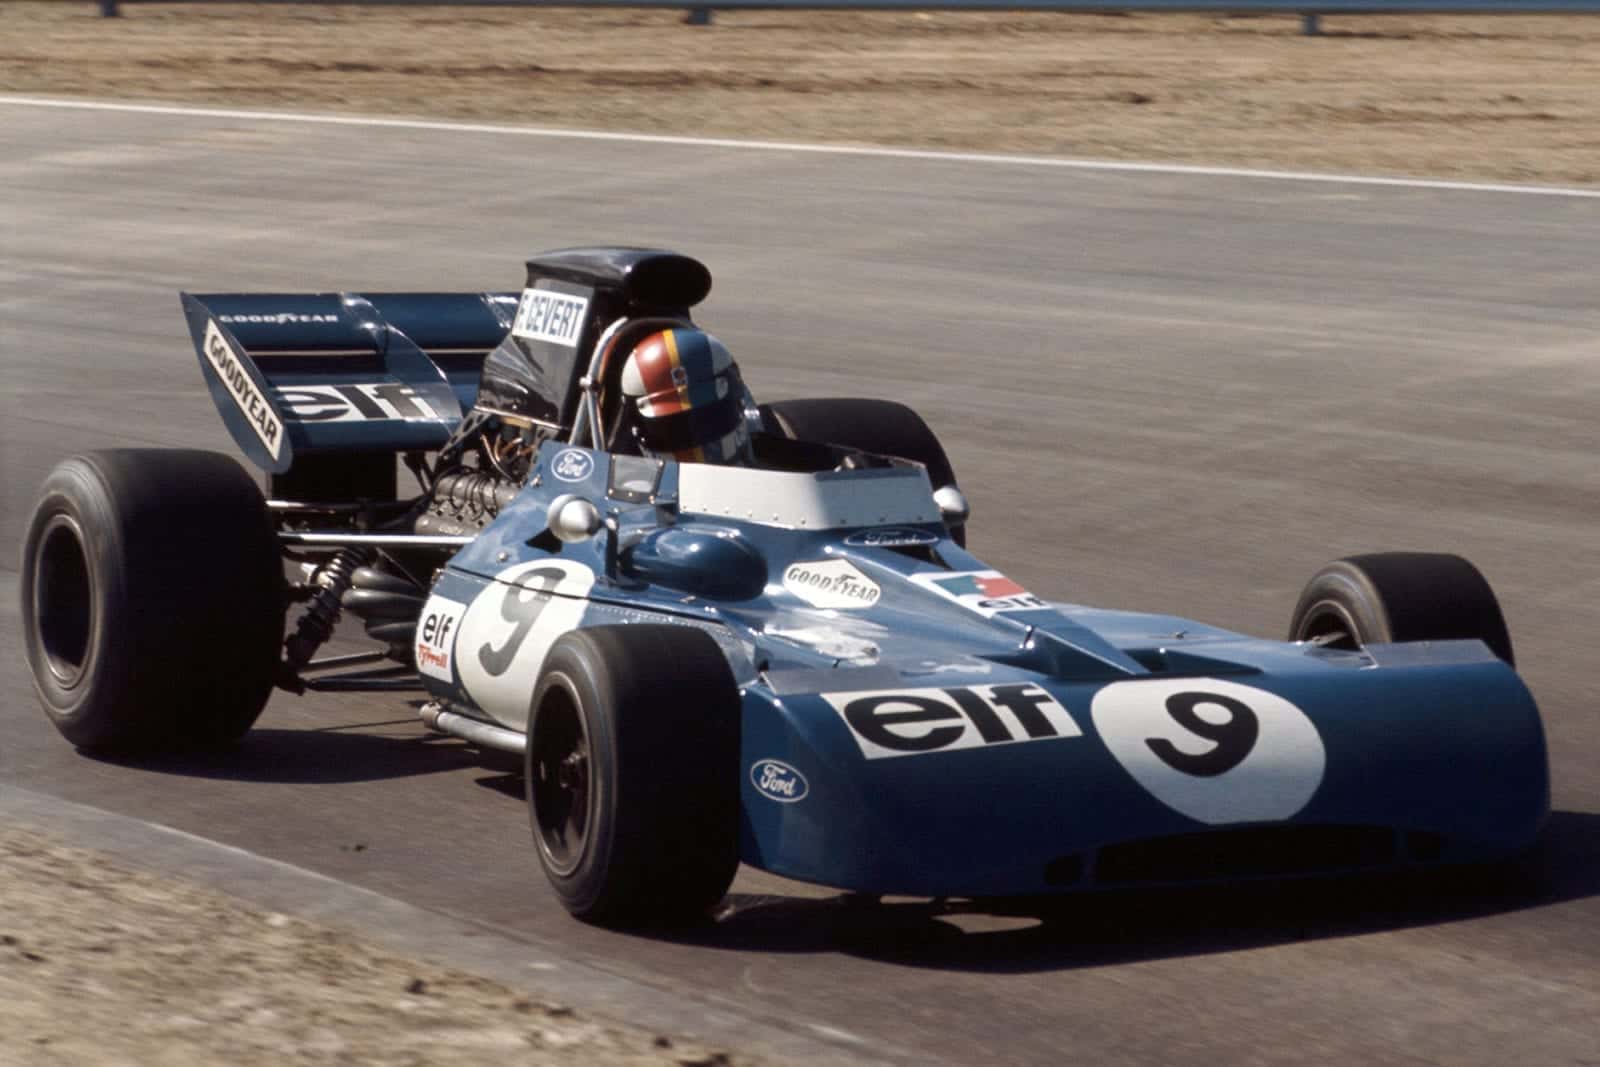 Francois Cevert driving for Tyrrell at the 1971 United States Grand Prix.